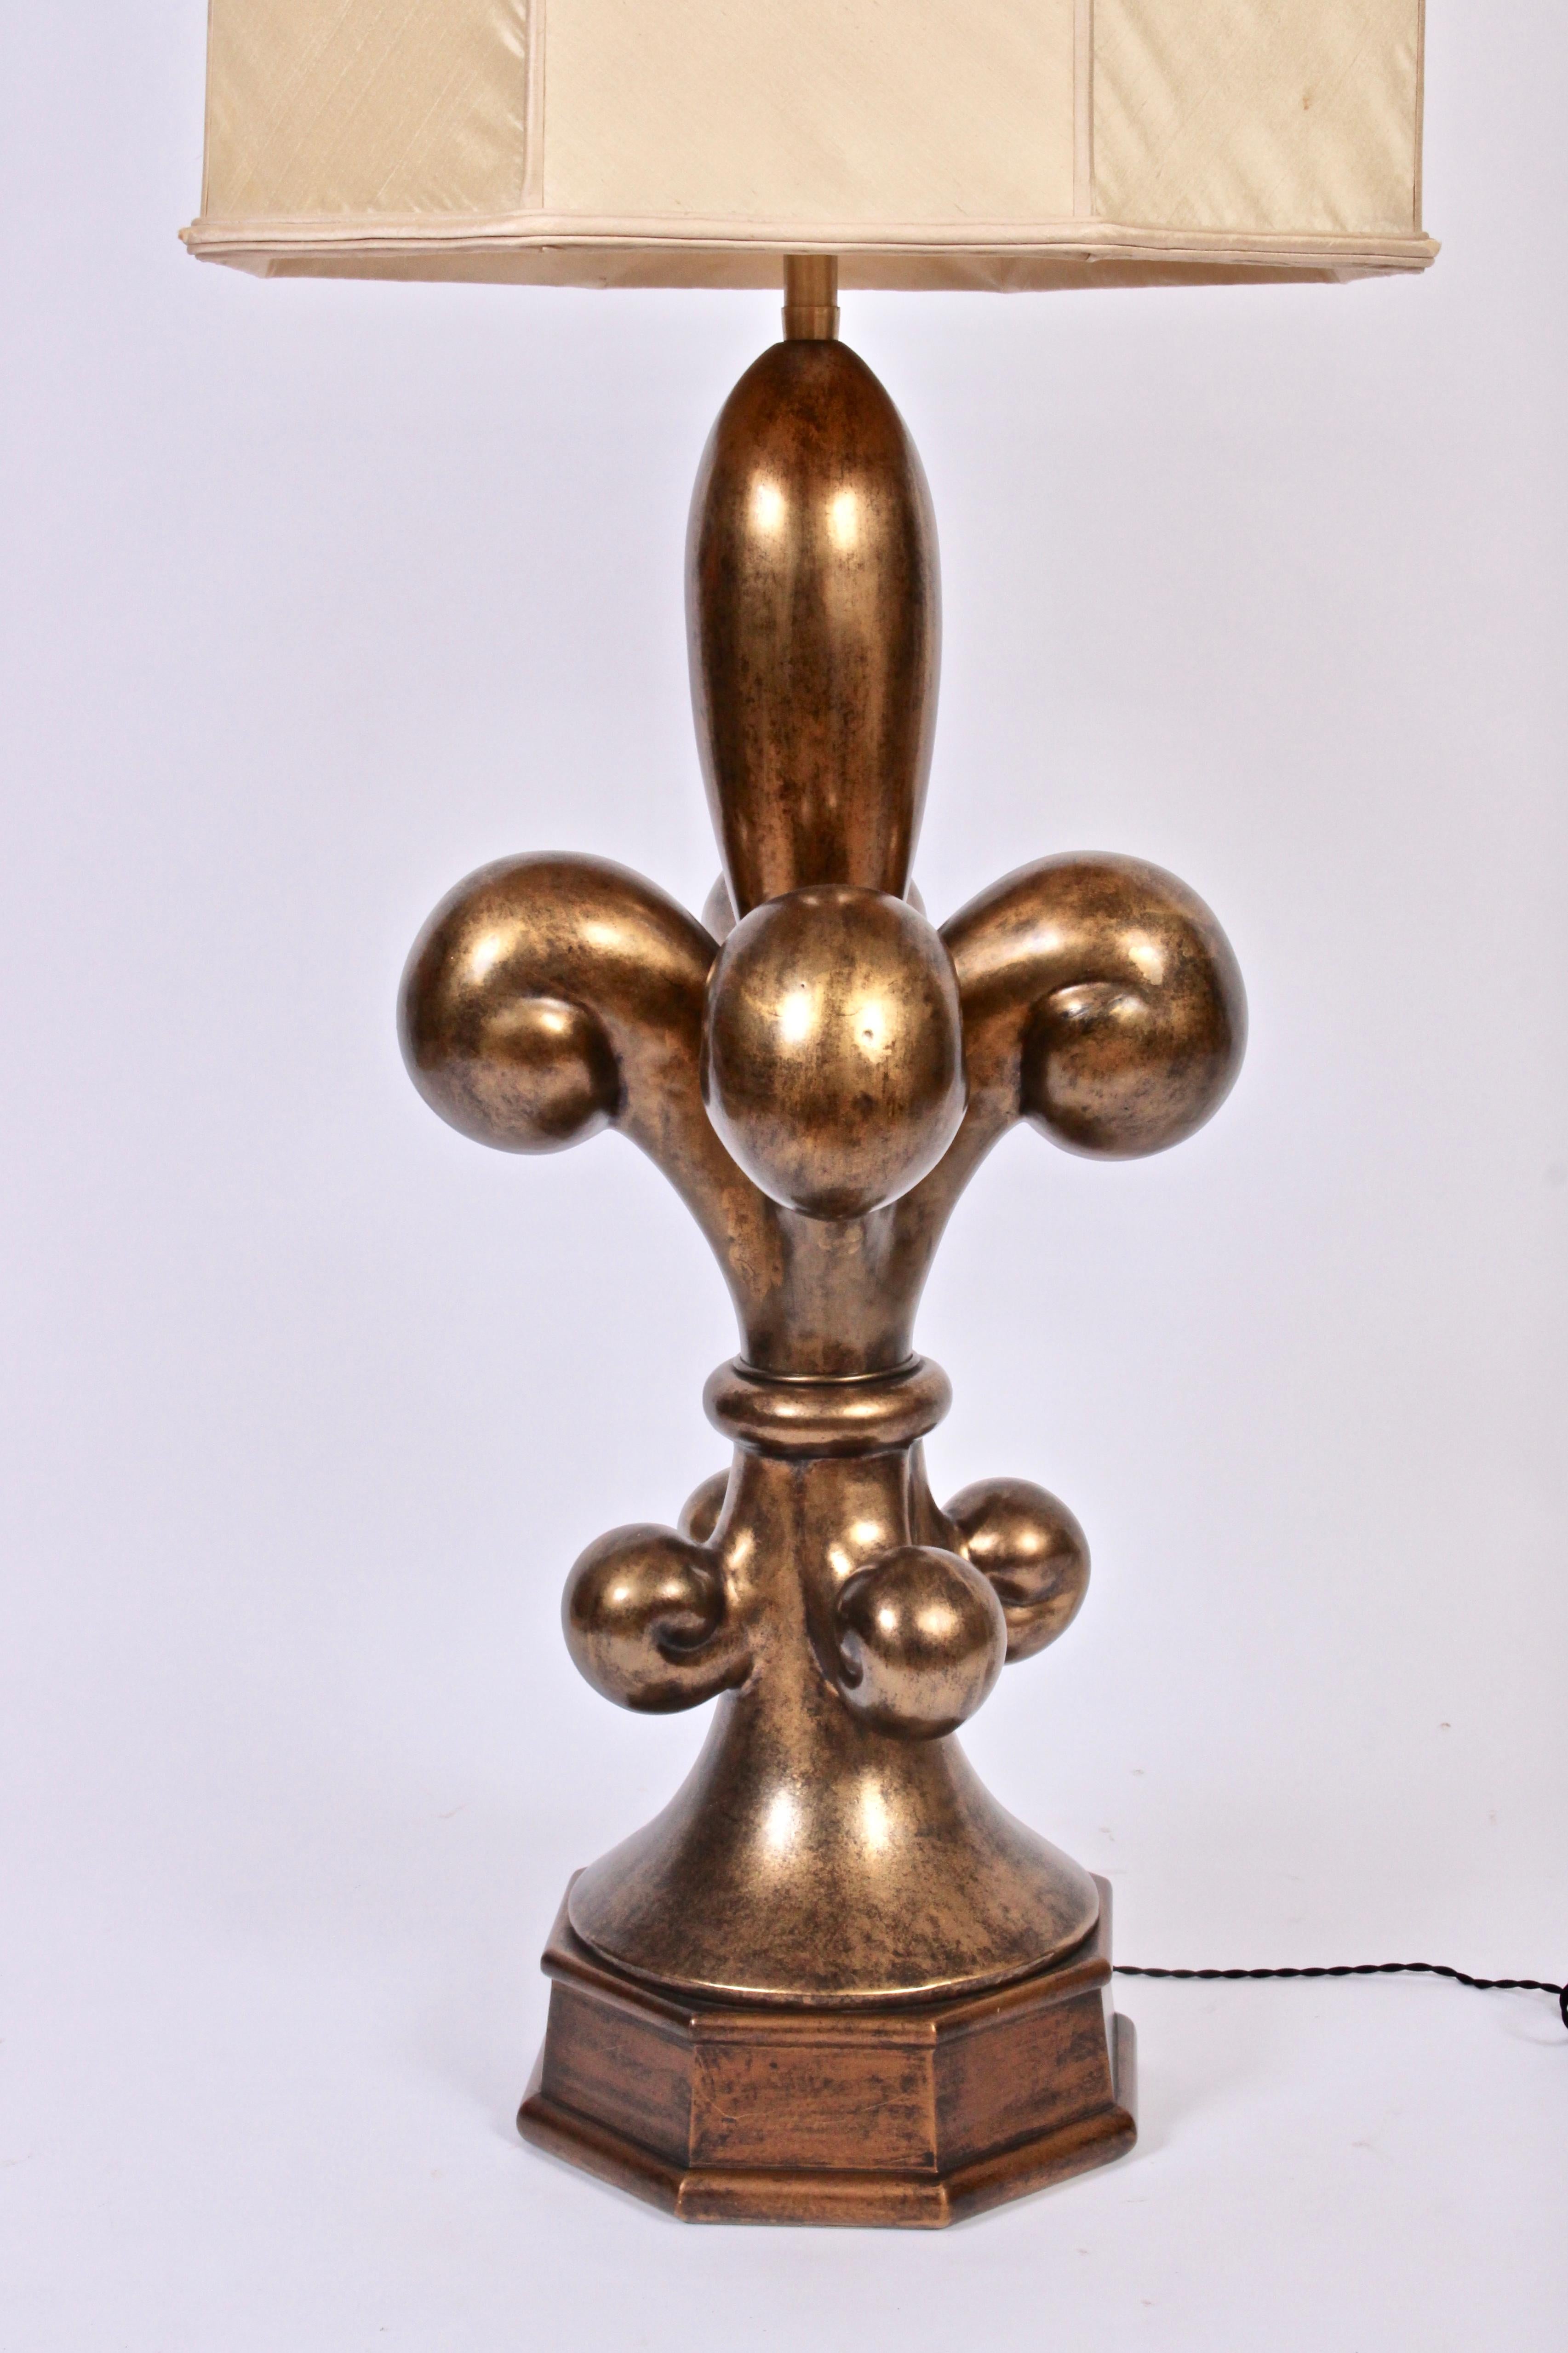 Substantial Six Foot Marbro Lighting Company Brass Table Lamp with White Milk Glass Shade. Statuesque sculptural fleur de lis form with Antique Brass finish. Stands approximately 6 feet tall. Includes glass liner shade. Fabric shade shown for